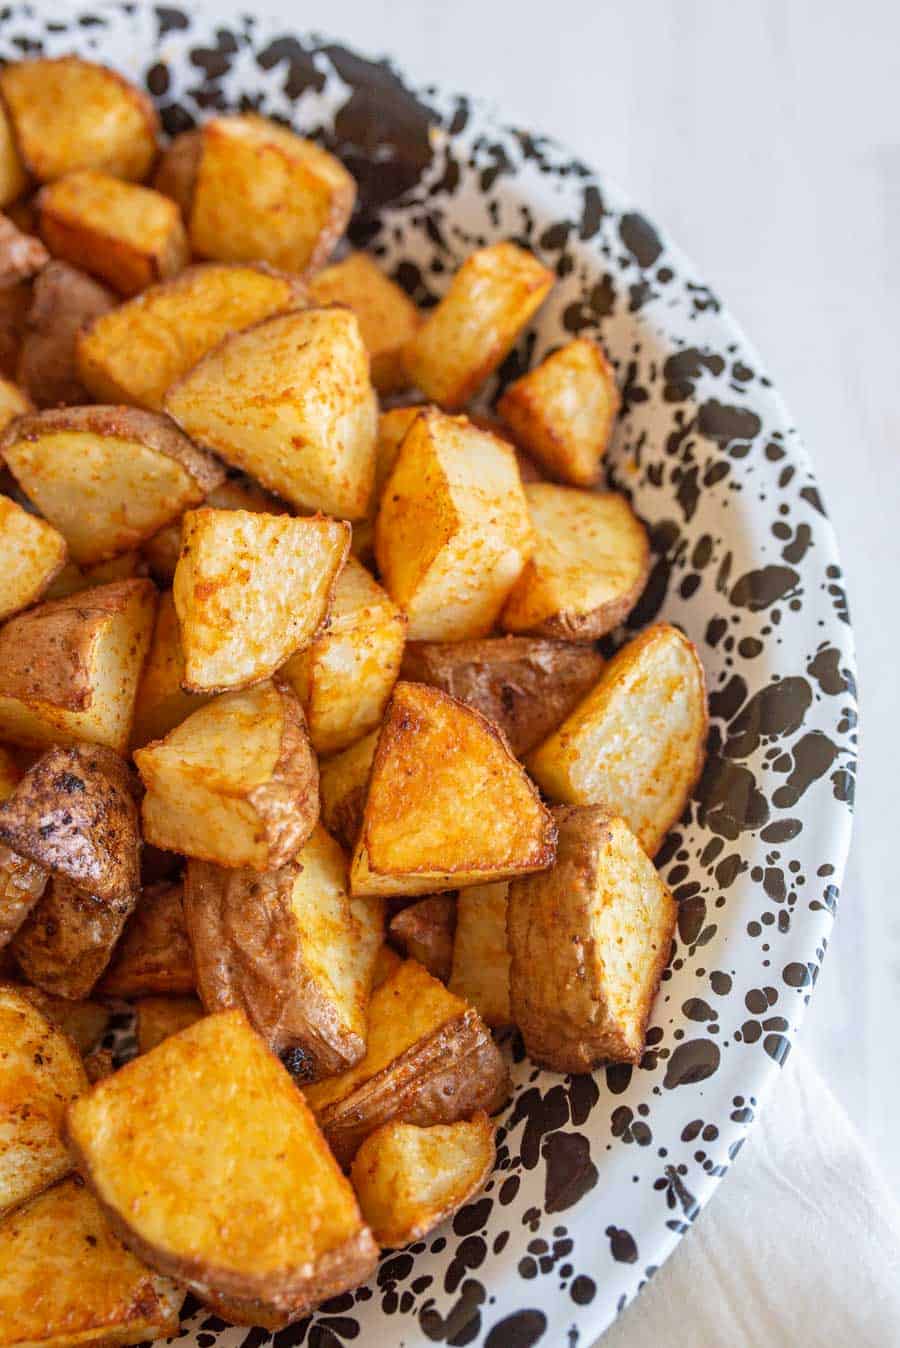 https://www.blessthismessplease.com/wp-content/uploads/2020/12/roasted-red-potatoes-3-of-5.jpg